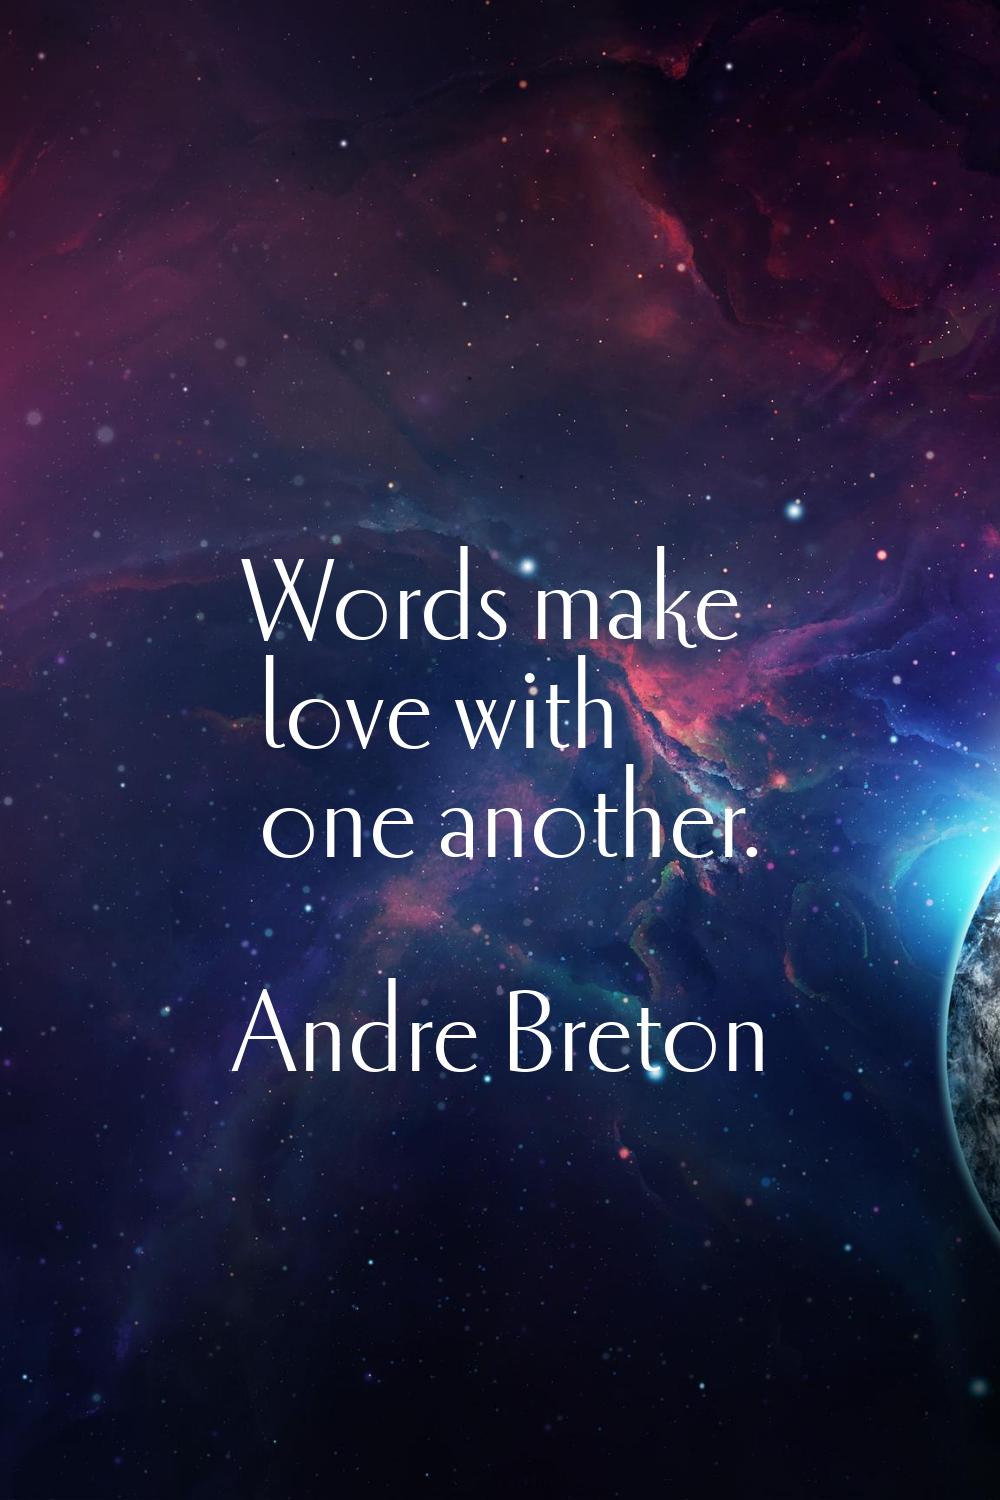 Words make love with one another.